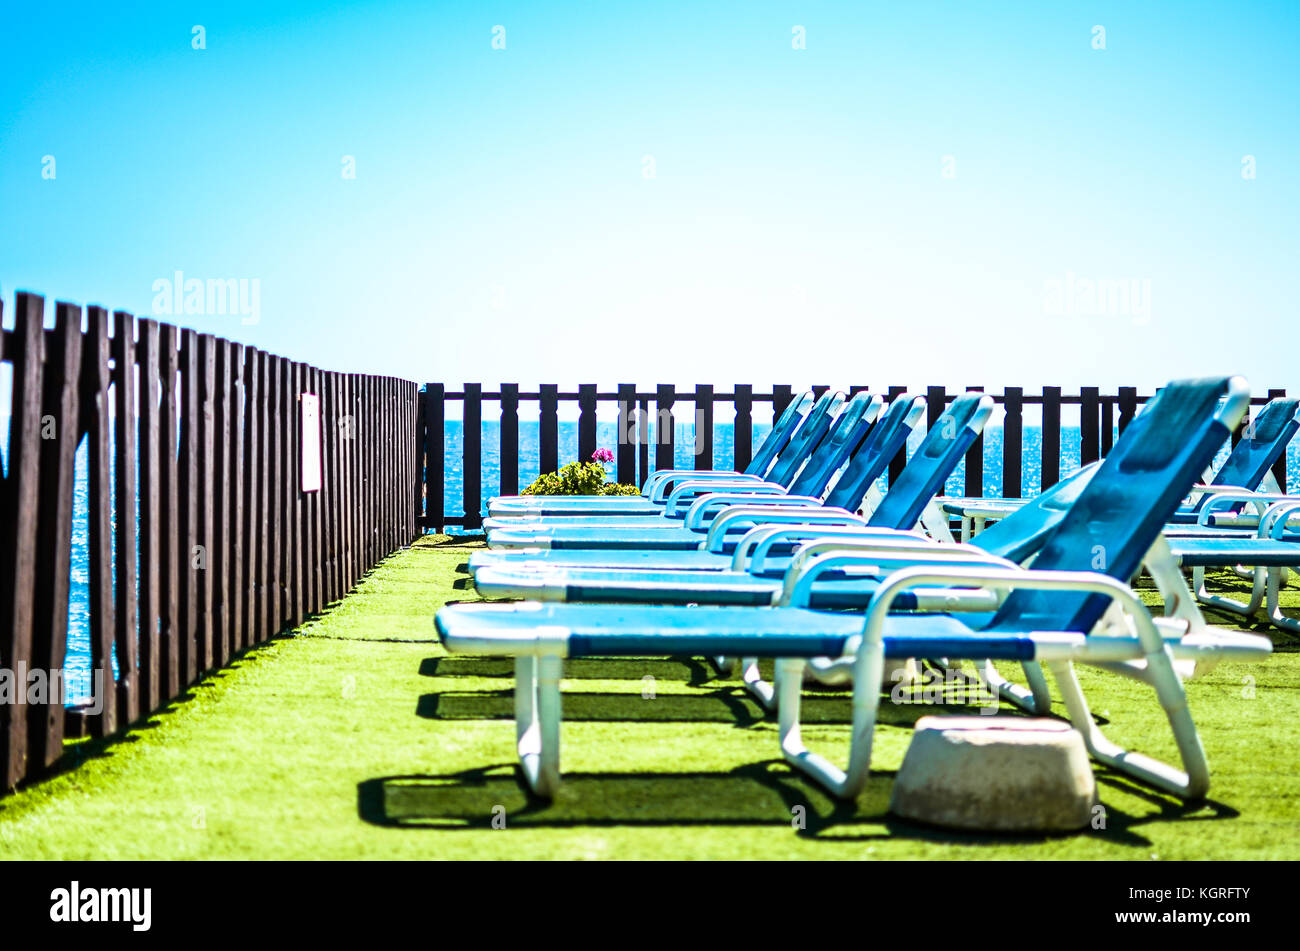 A row of sun chairs on a seaside resort overlooking the Mediterranean Sea under a clear blue sky Stock Photo